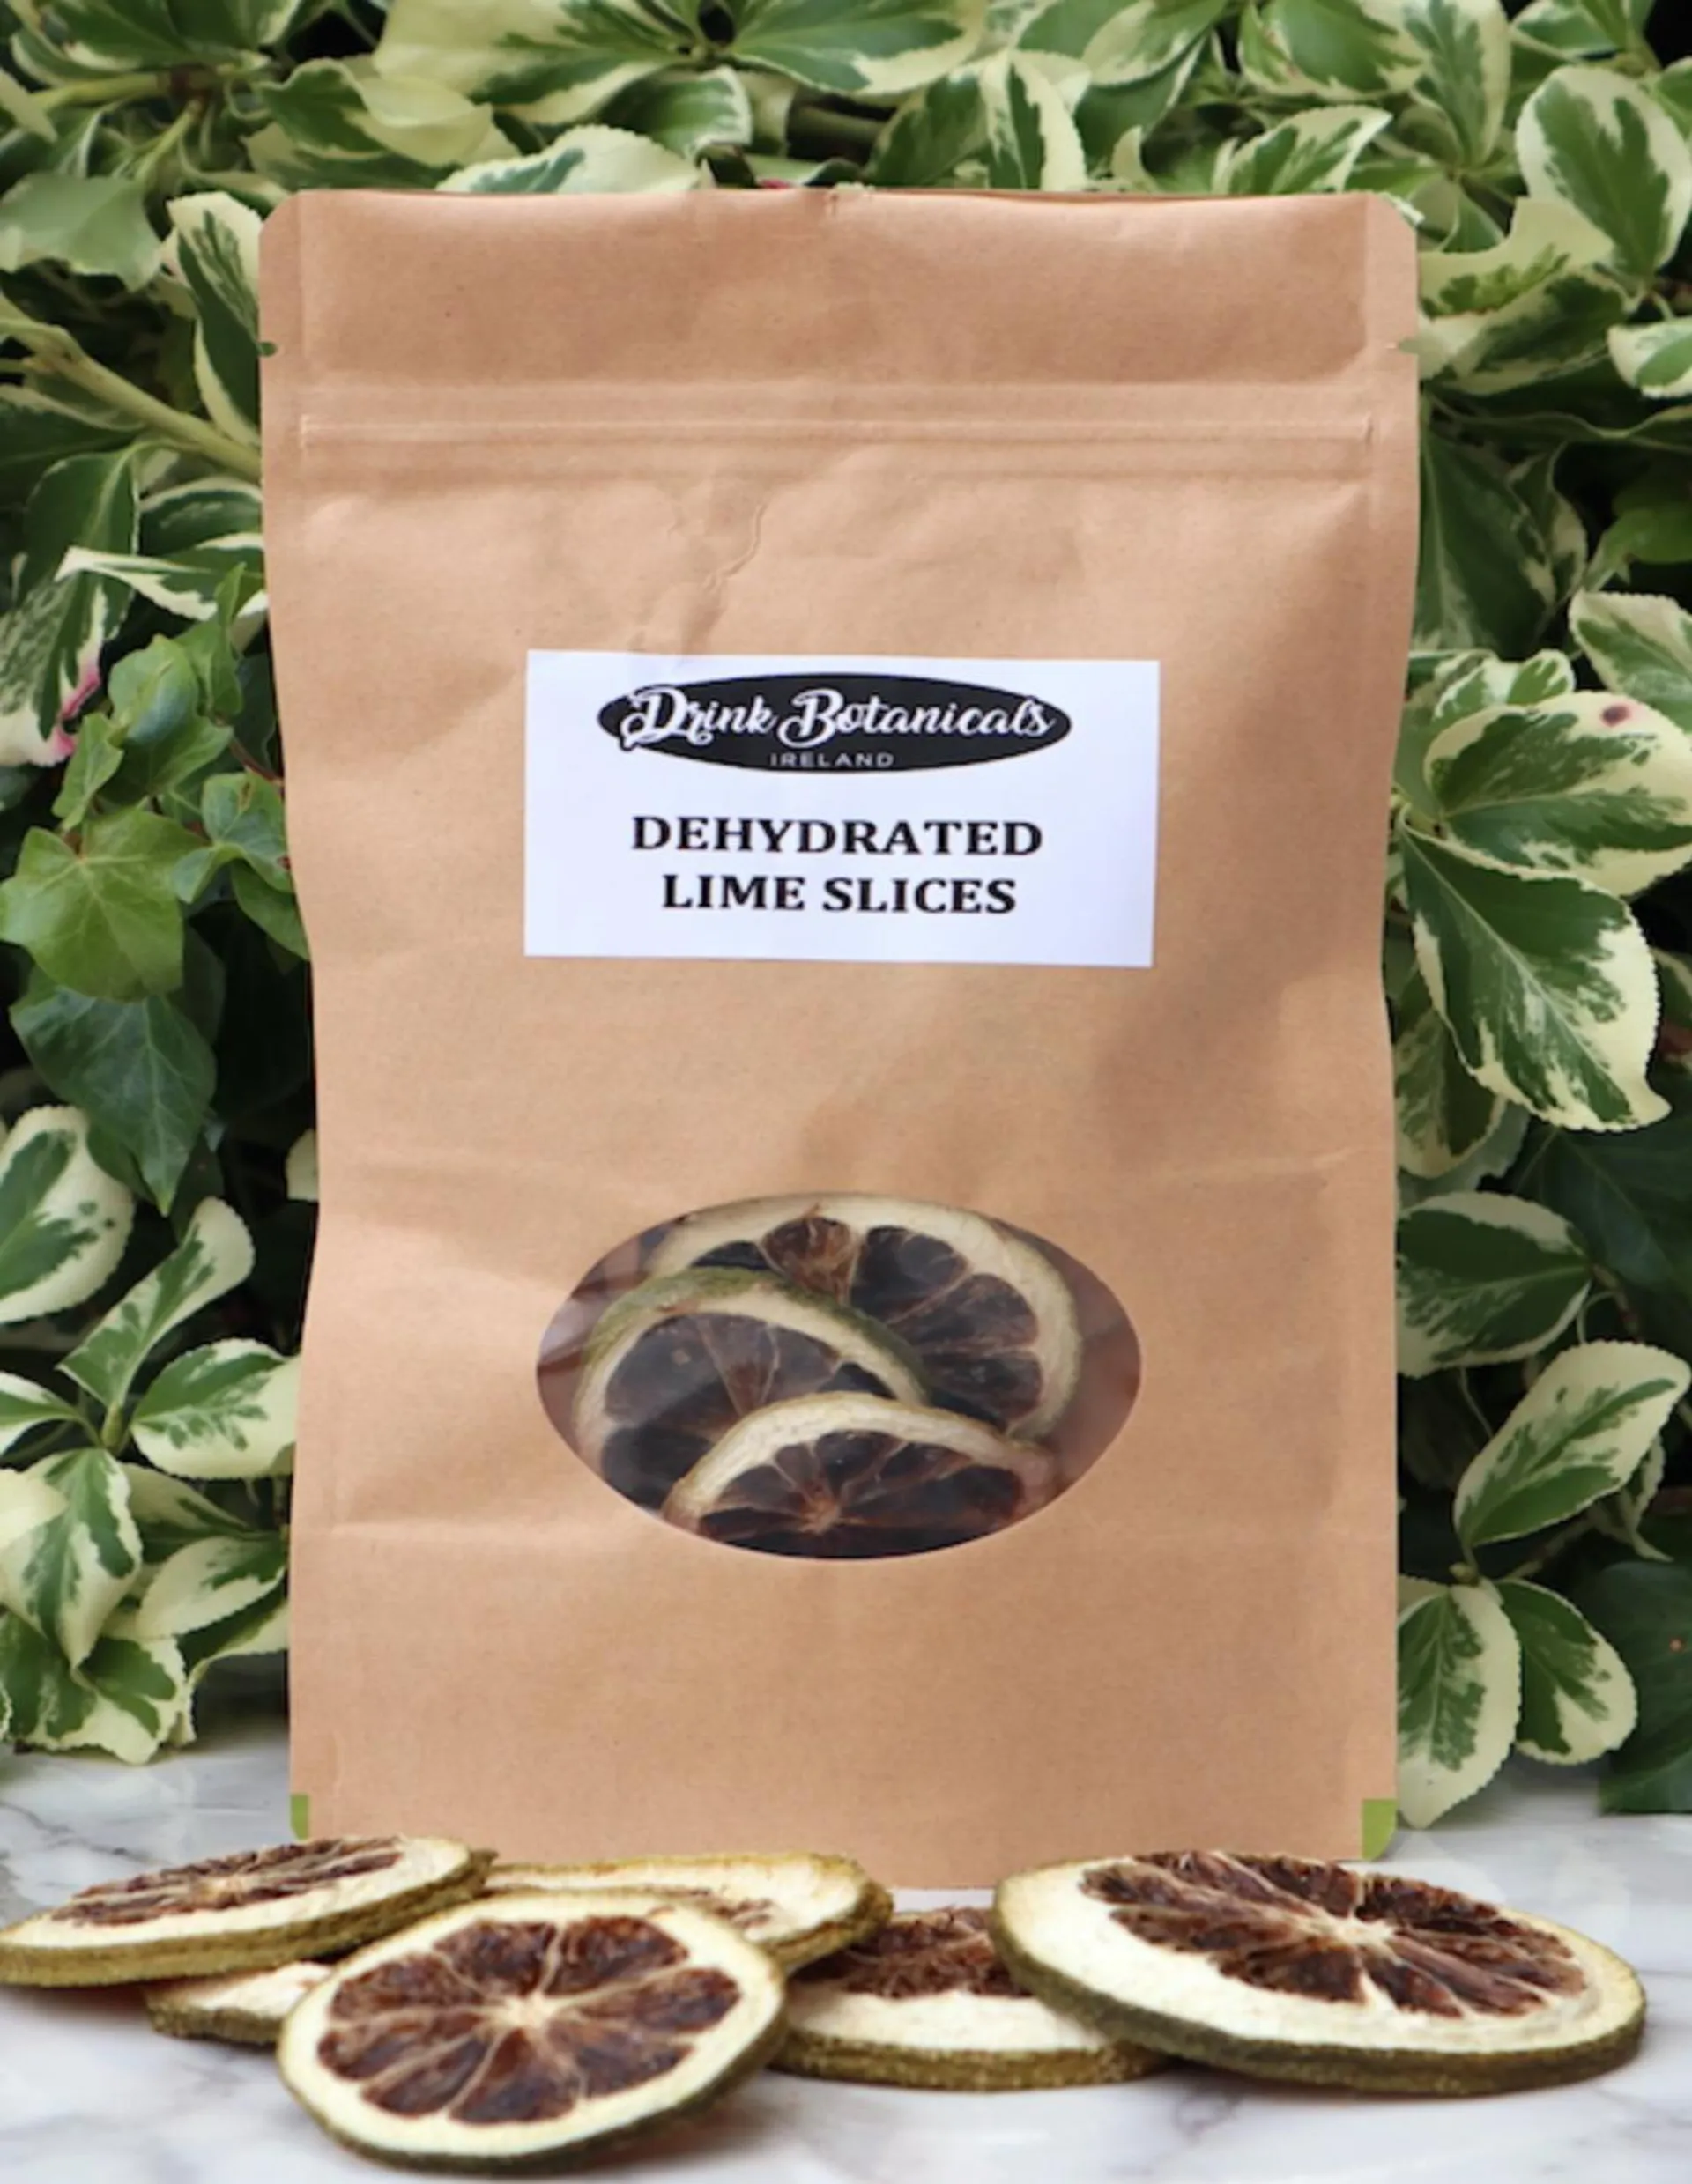 Drink Botanicals - Dehydrated Lime Slices